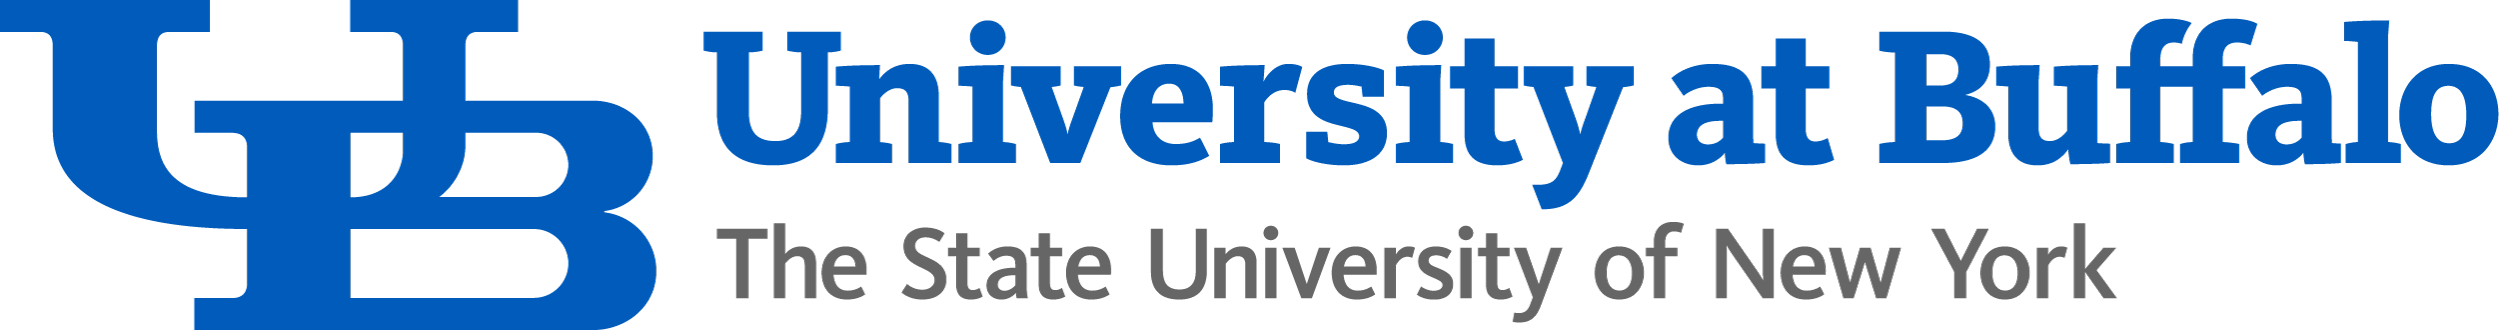 UB H.O.M.E. loans now available to part-time university employees